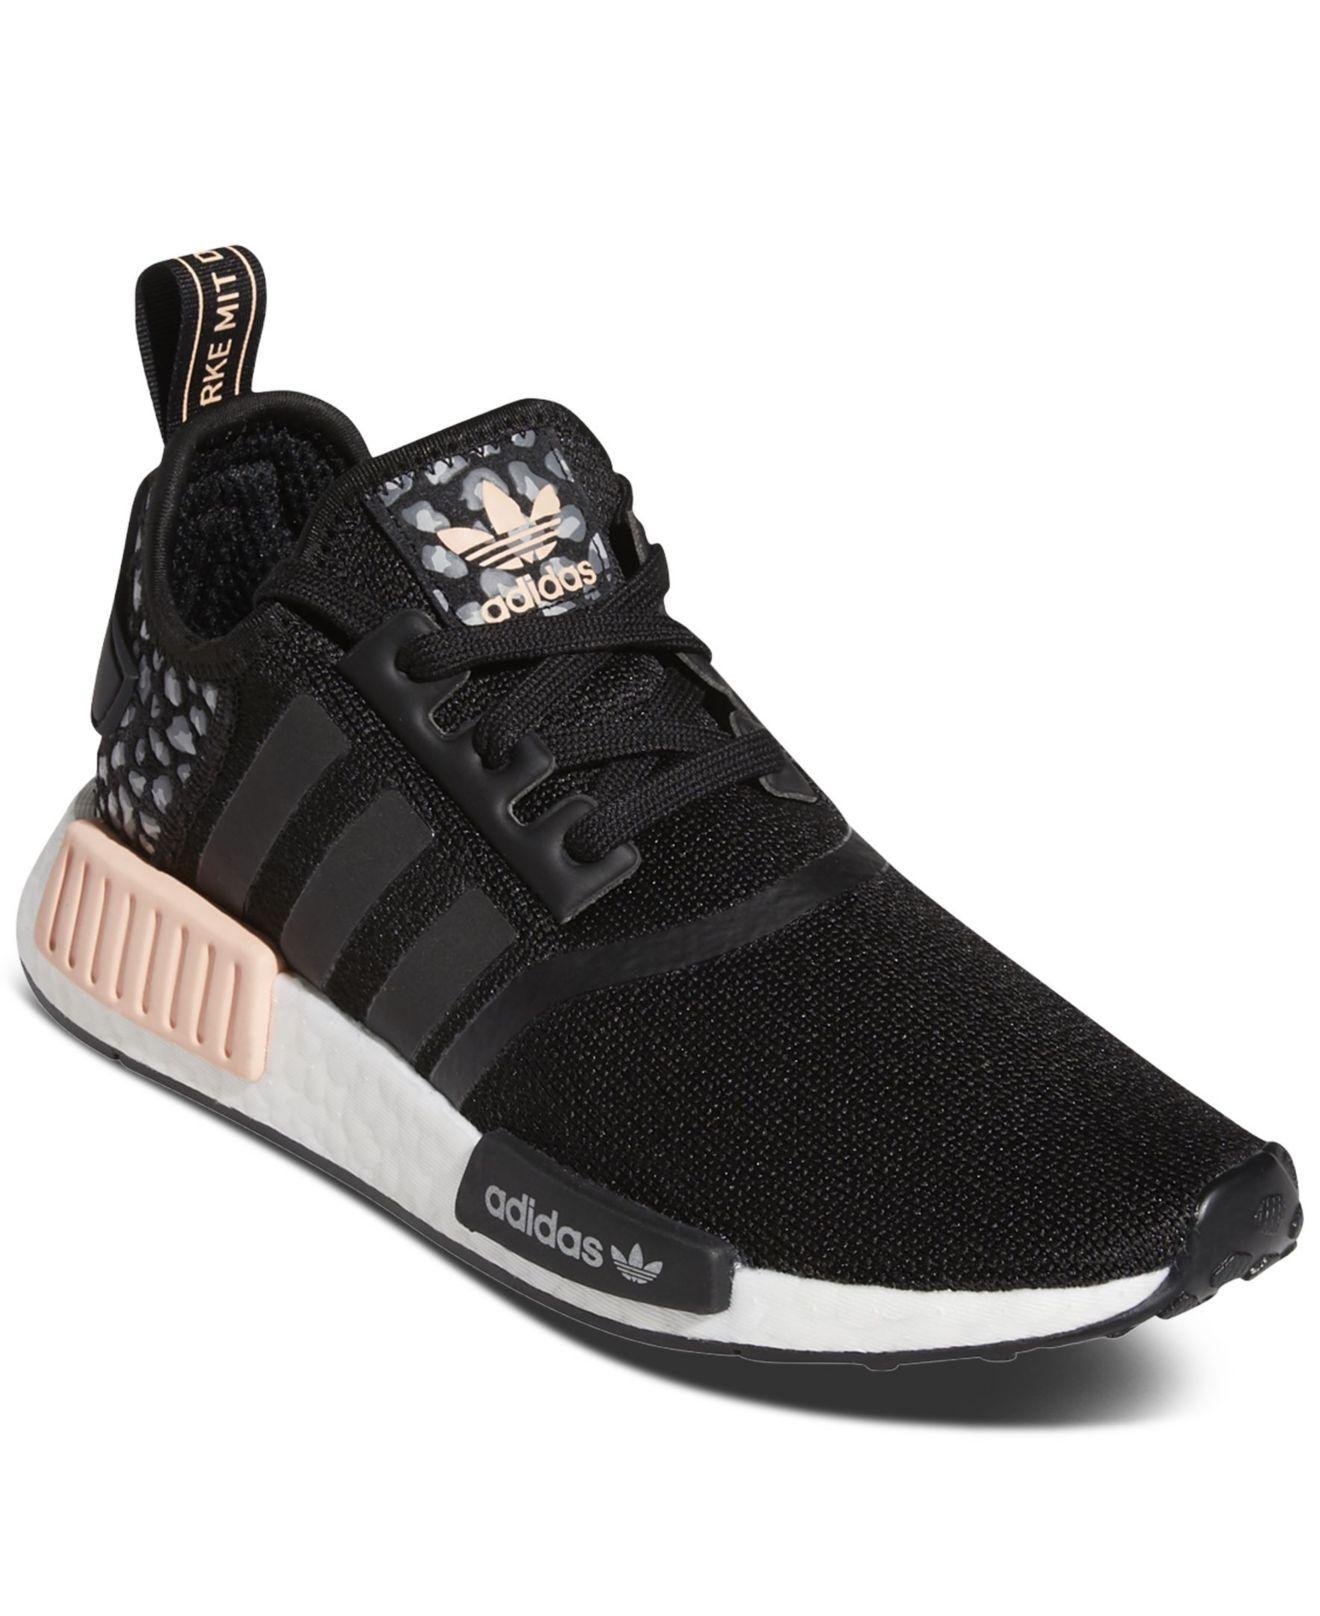 adidas Synthetic Nmd R1 Animal Print Casual Sneakers From Finish Line in  Black | Lyst